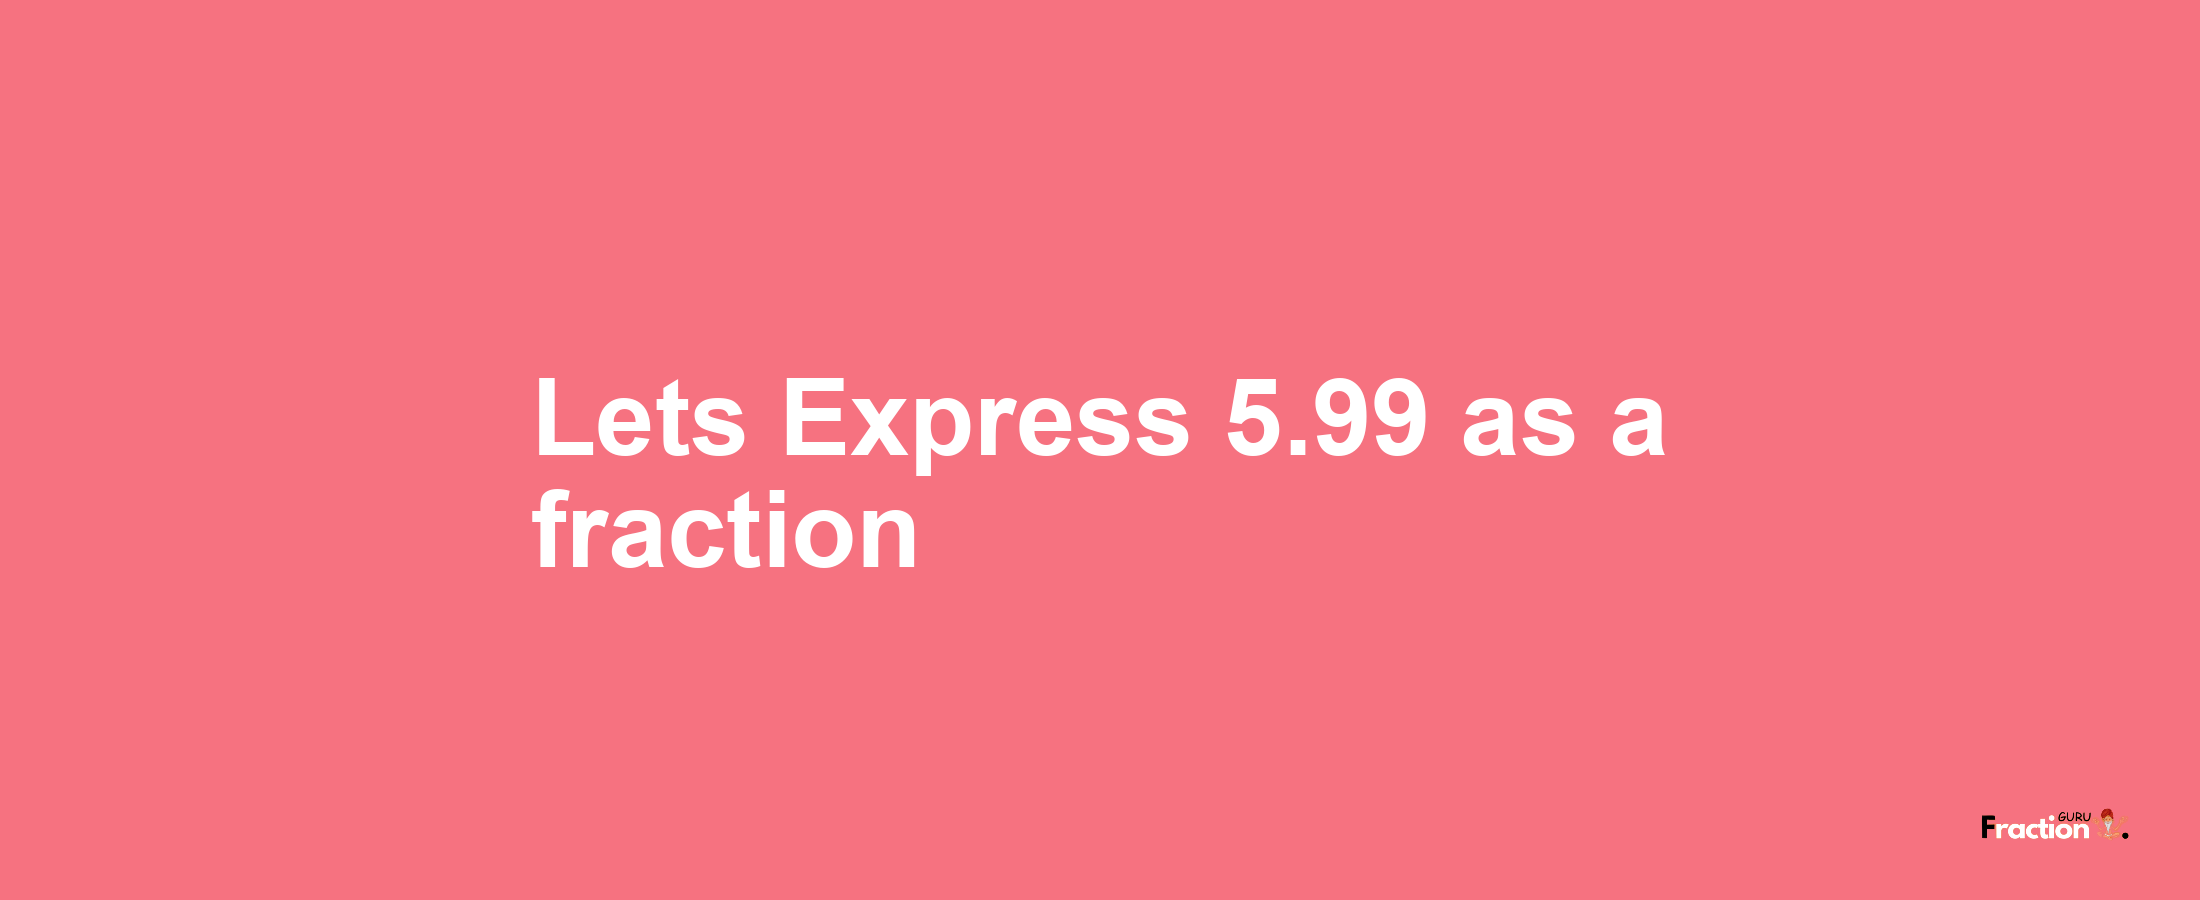 Lets Express 5.99 as afraction